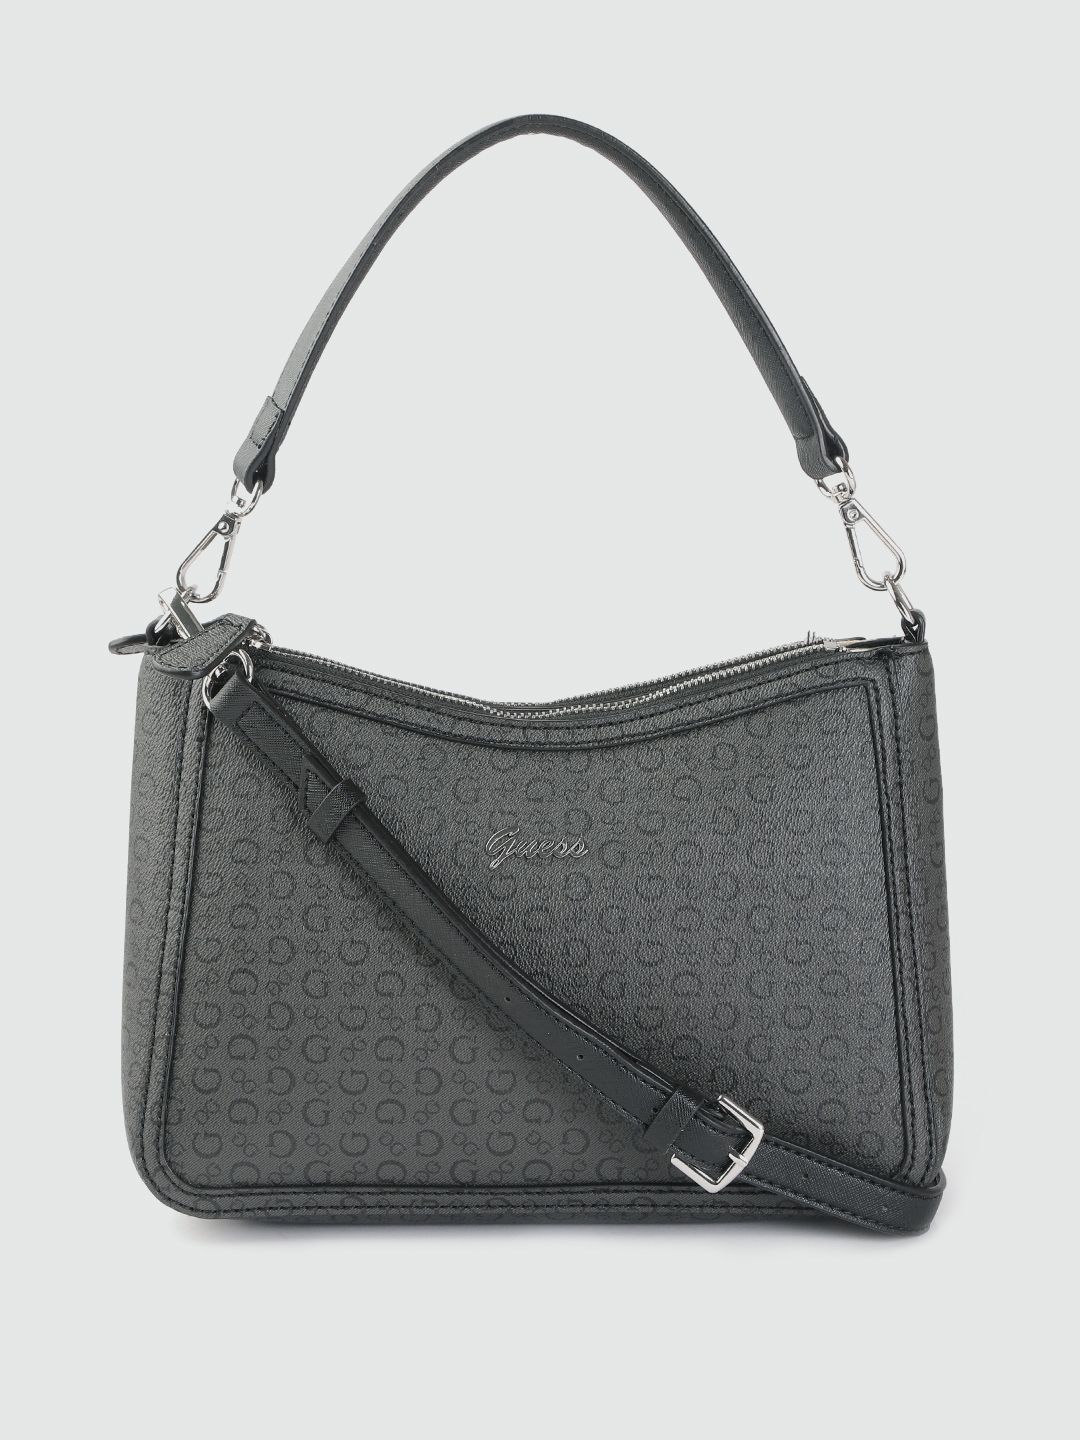 GUESS Women Charcoal Grey & Black Brand Logo Print Structured Handheld Bag Price in India